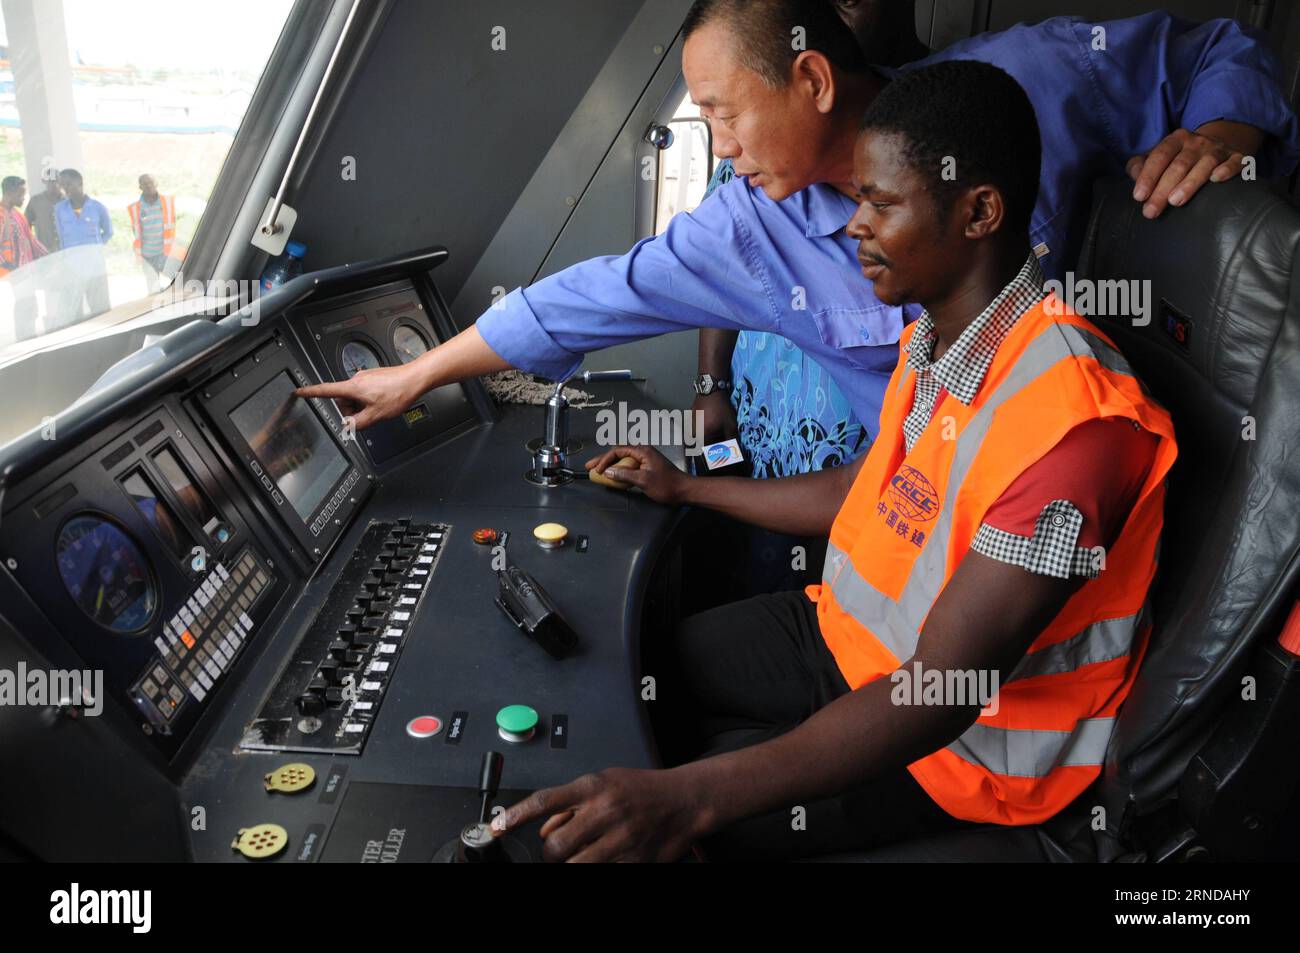 160512) -- ABUJA, May 12, 2016 -- A Chinese train driver teaches a local  worker on the train in Abuja, Nigeria on May 12, 2016. A Chinese firm  undertaking the construction of